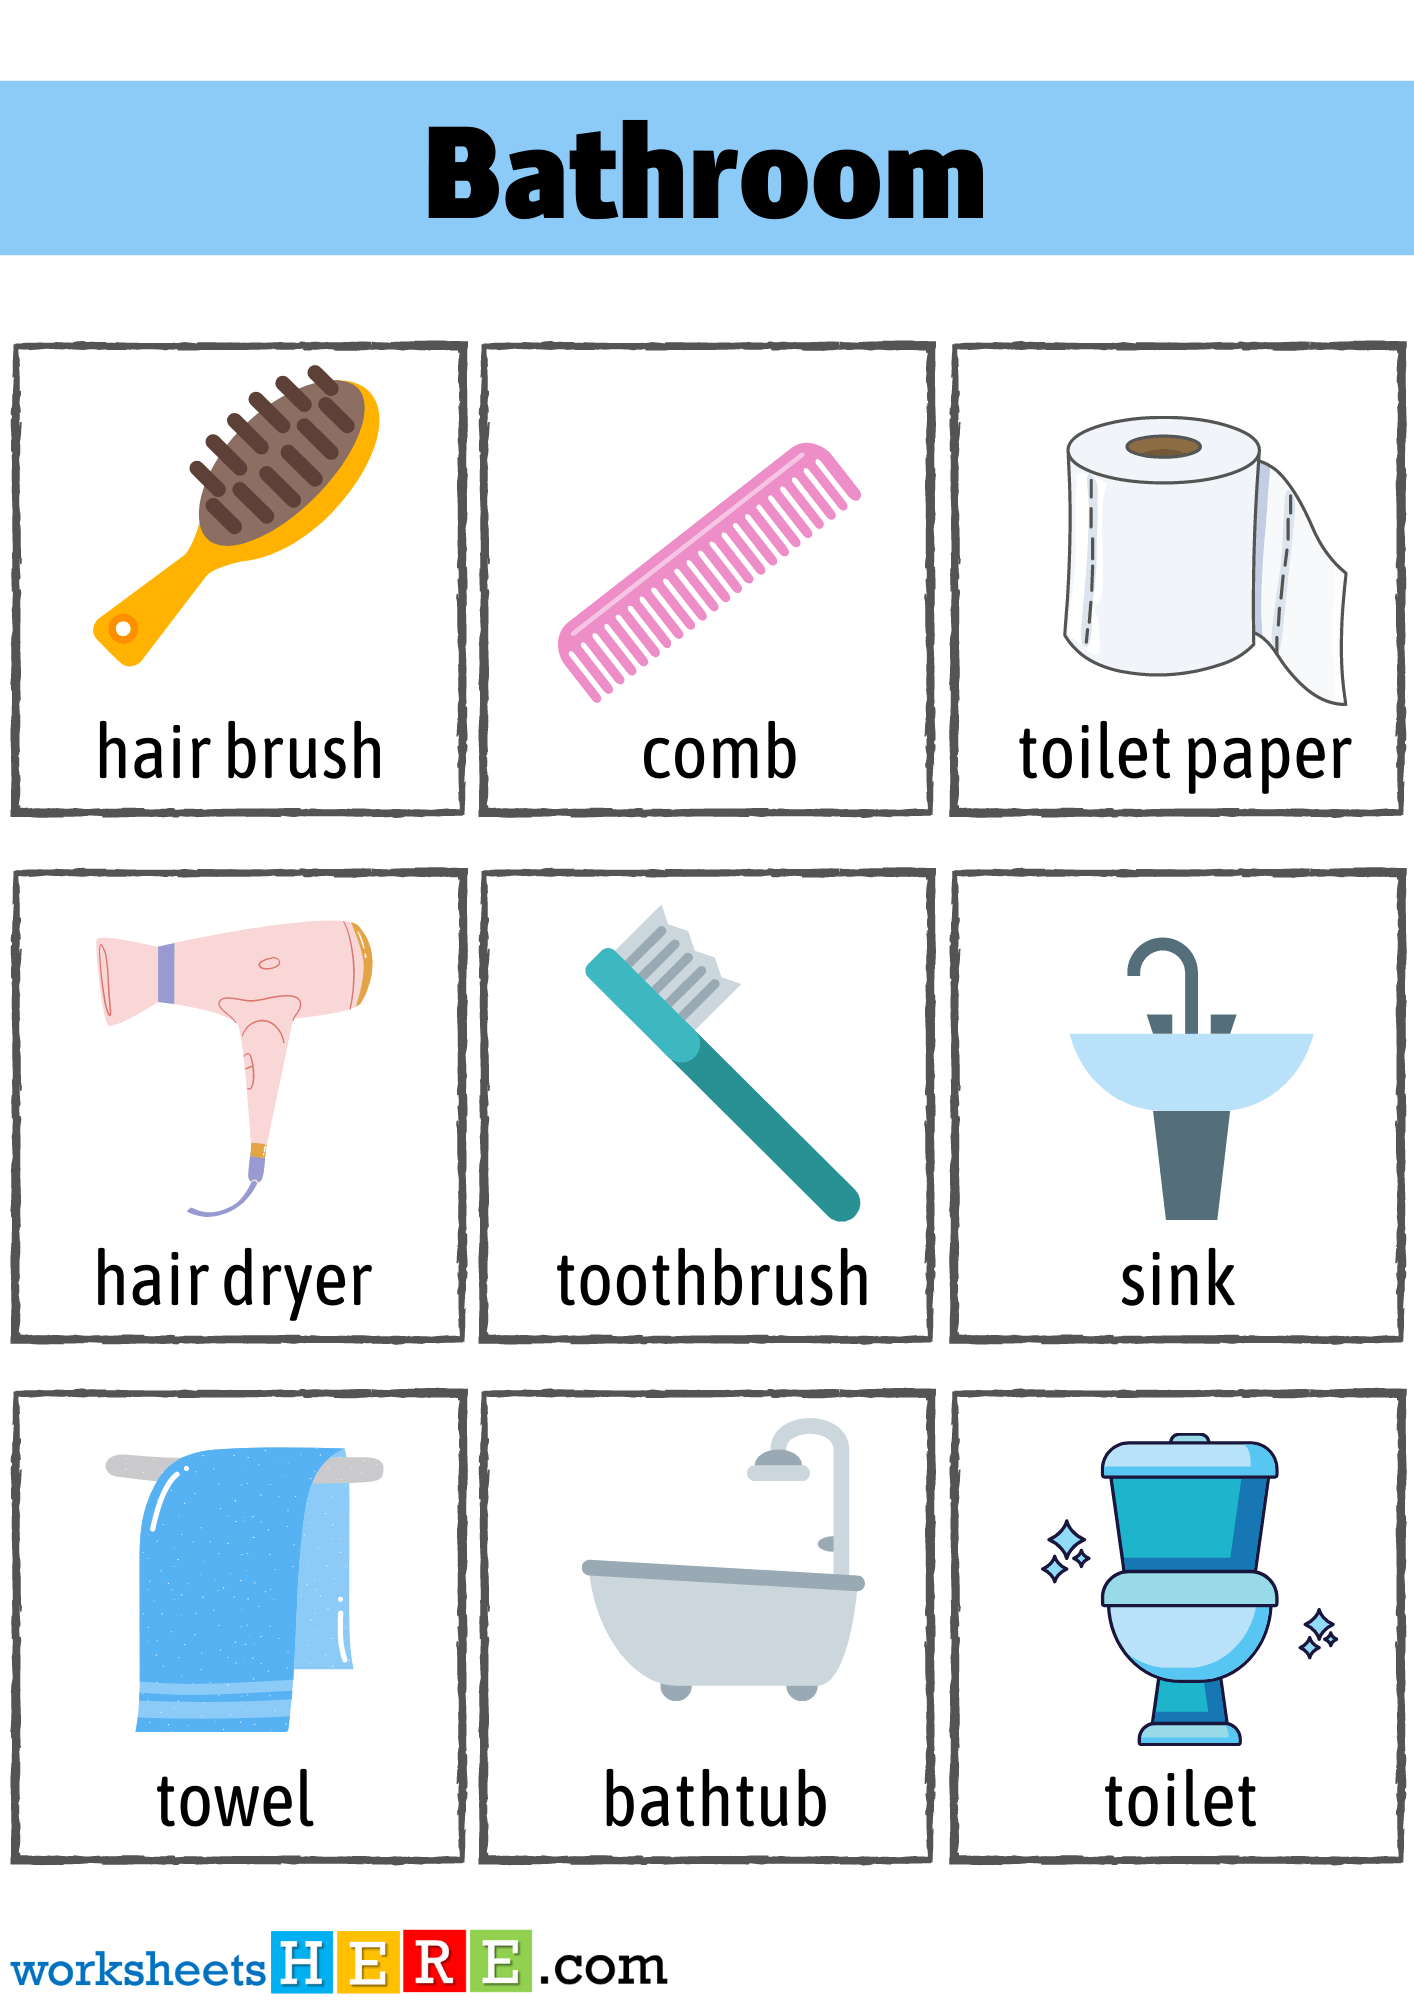 Bathroom Flashcards, Bathroom Words Names with Pictures Worksheets